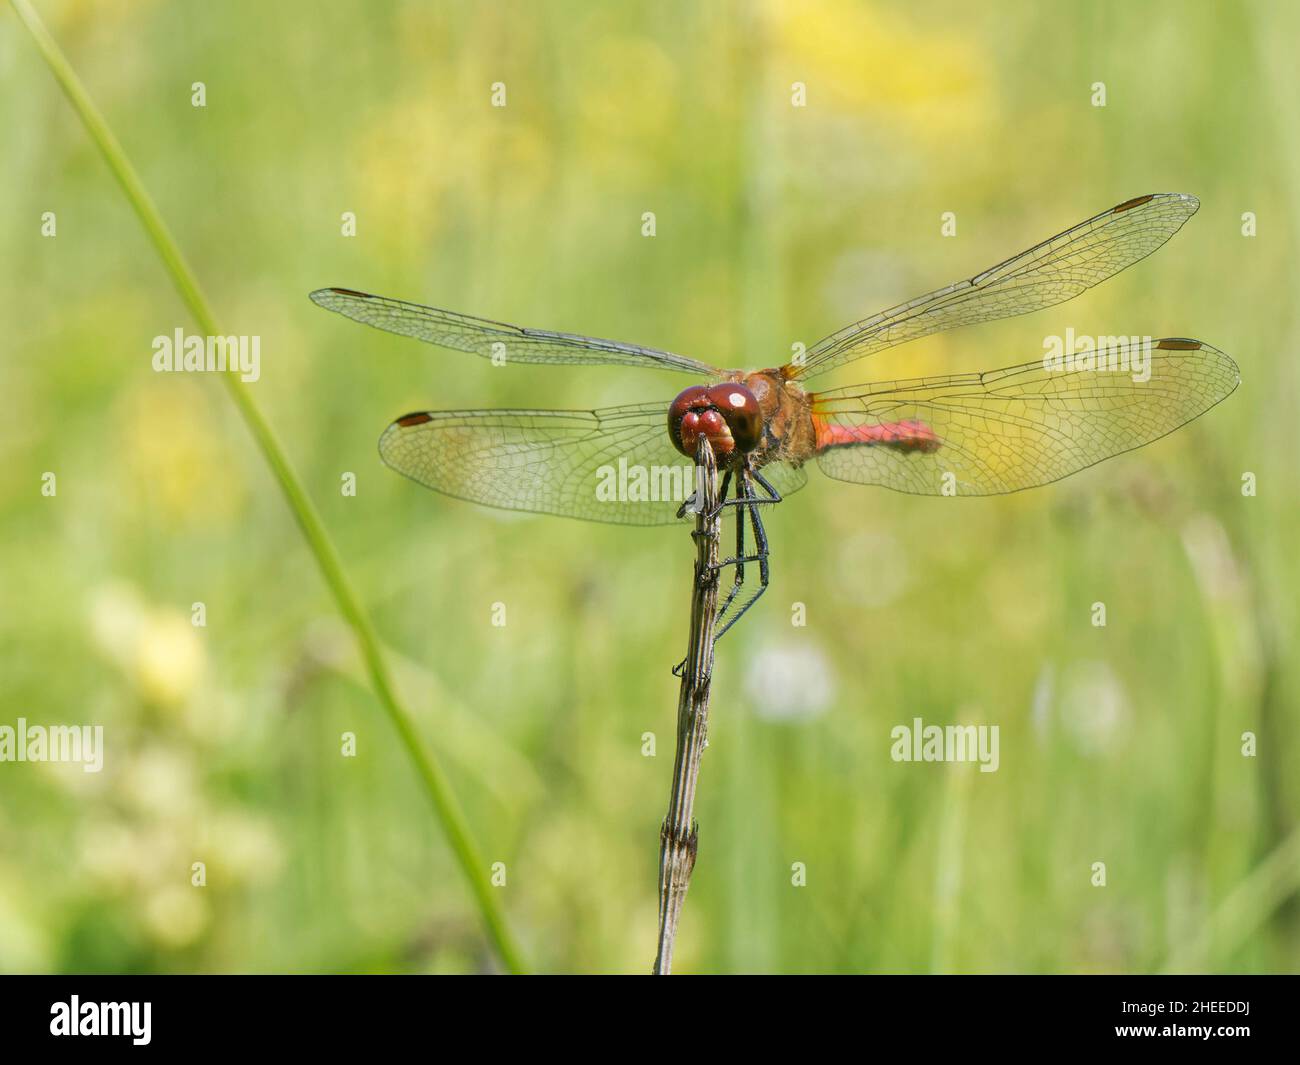 Ruddy darter dragonfly (Sympetrum sanguineum) male perched on a Horsetail stem in a freshwater marsh ready to chase after prey, Kenfig NNR, Wales, UK. Stock Photo